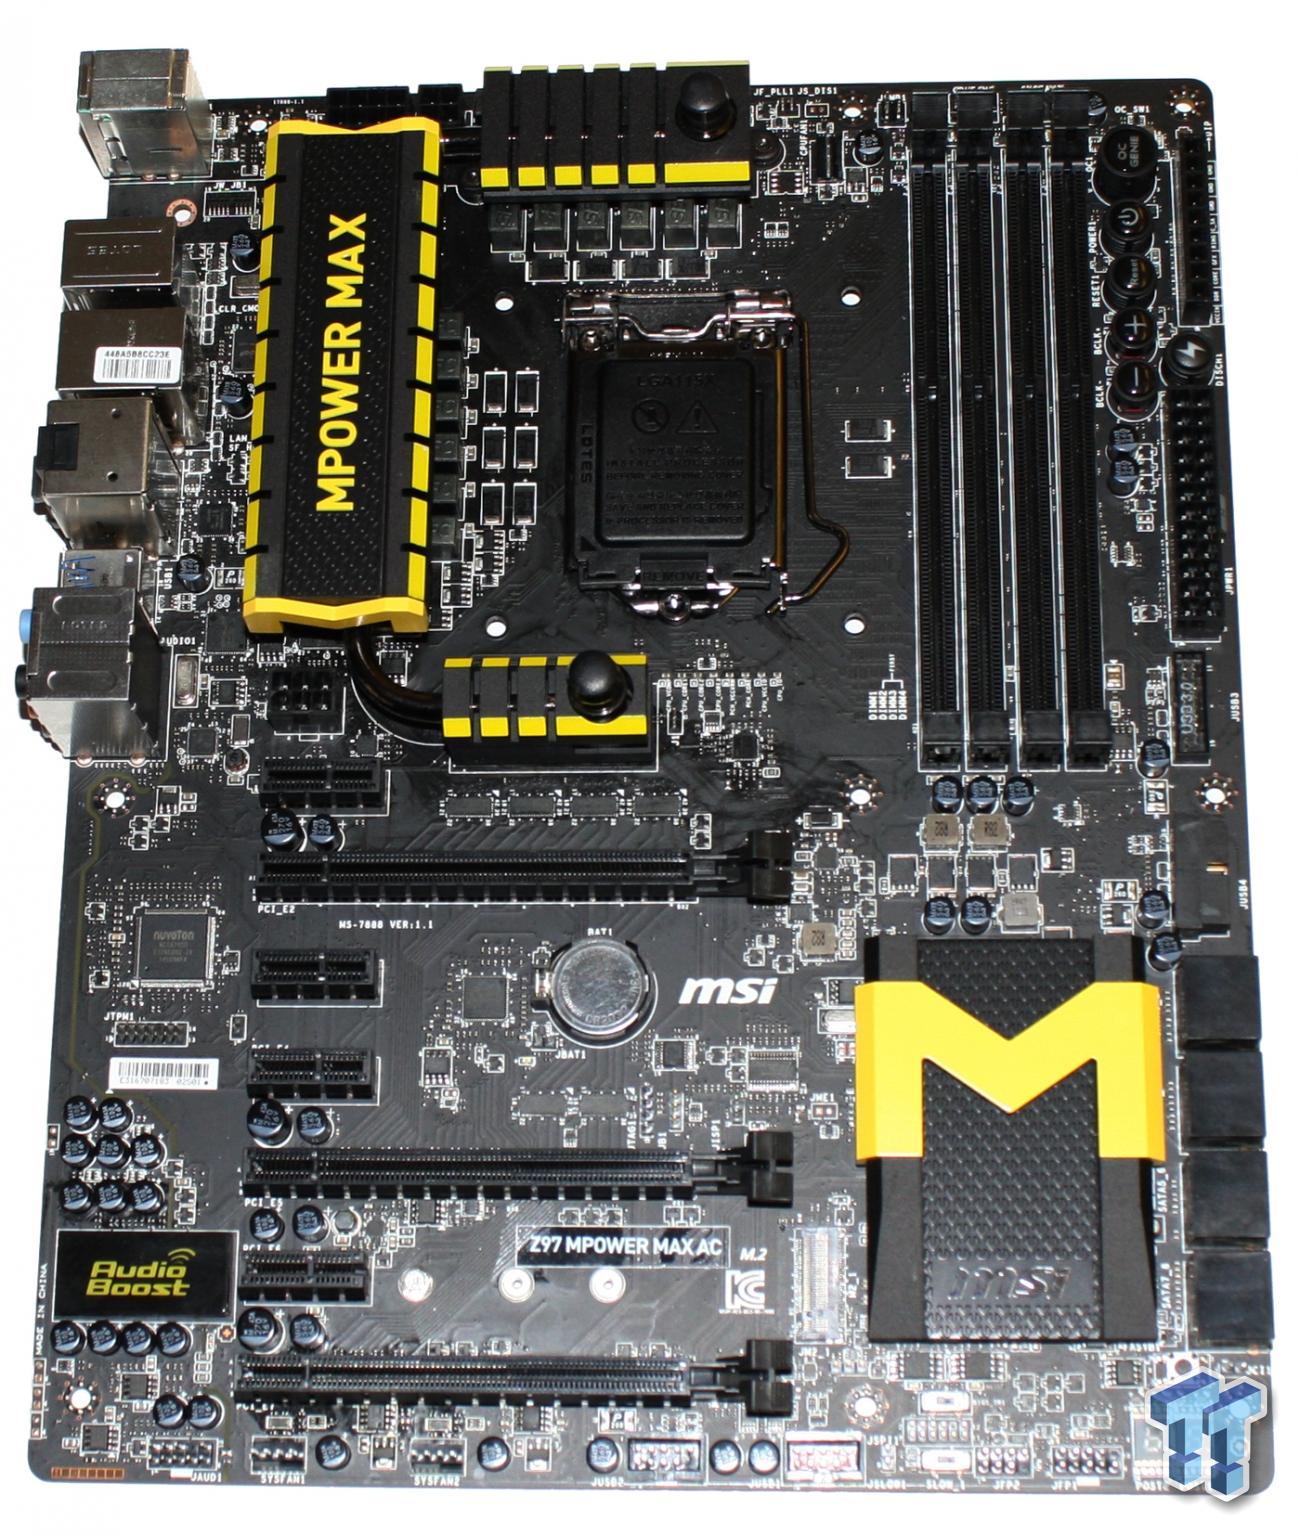 Z97 MPOWER MAX AC Z97) Motherboard Review